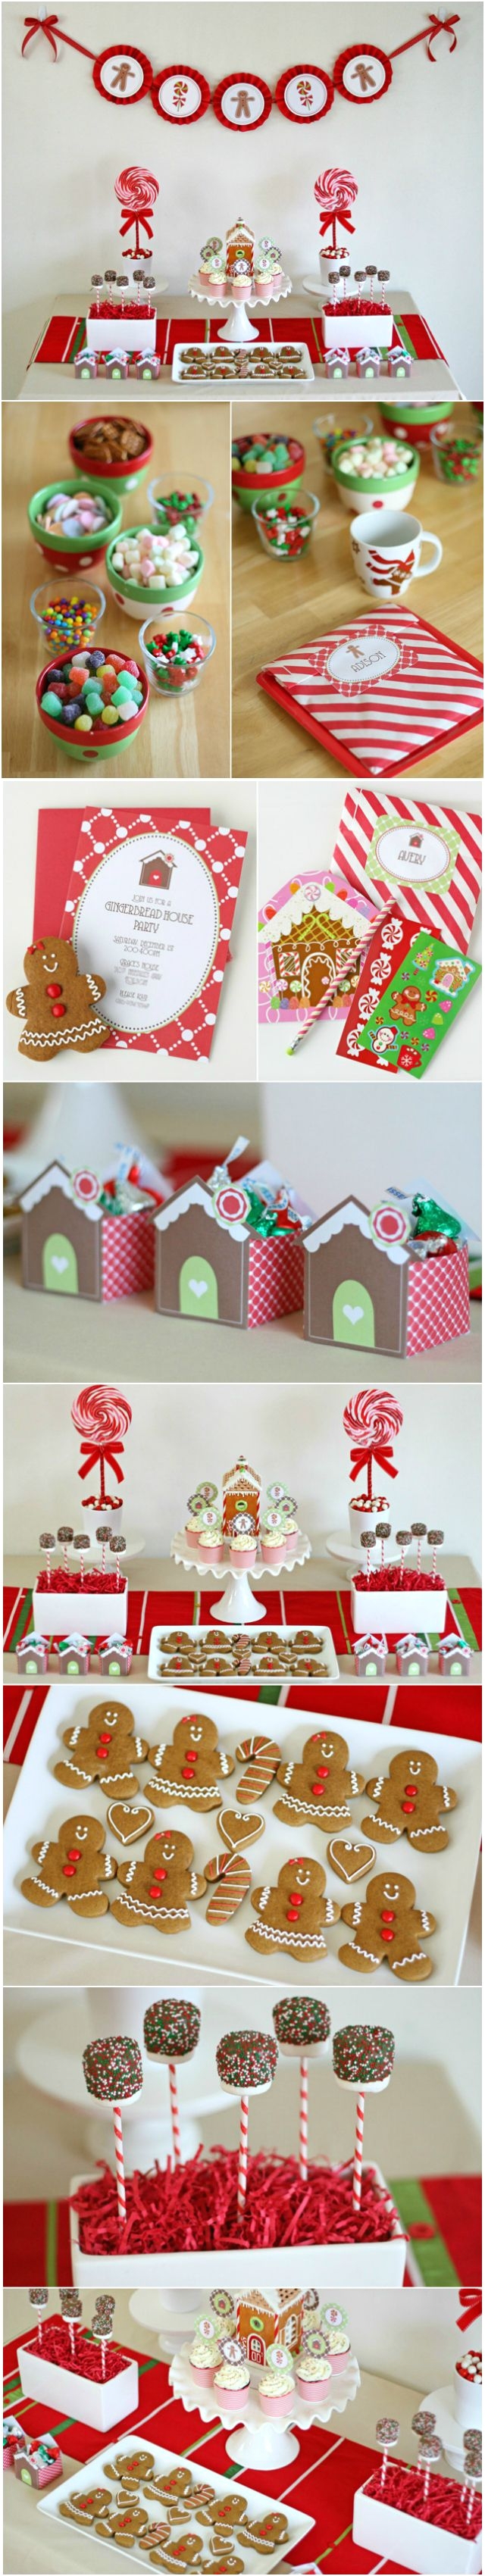 christmas inspiration a gingerbread house decorating party